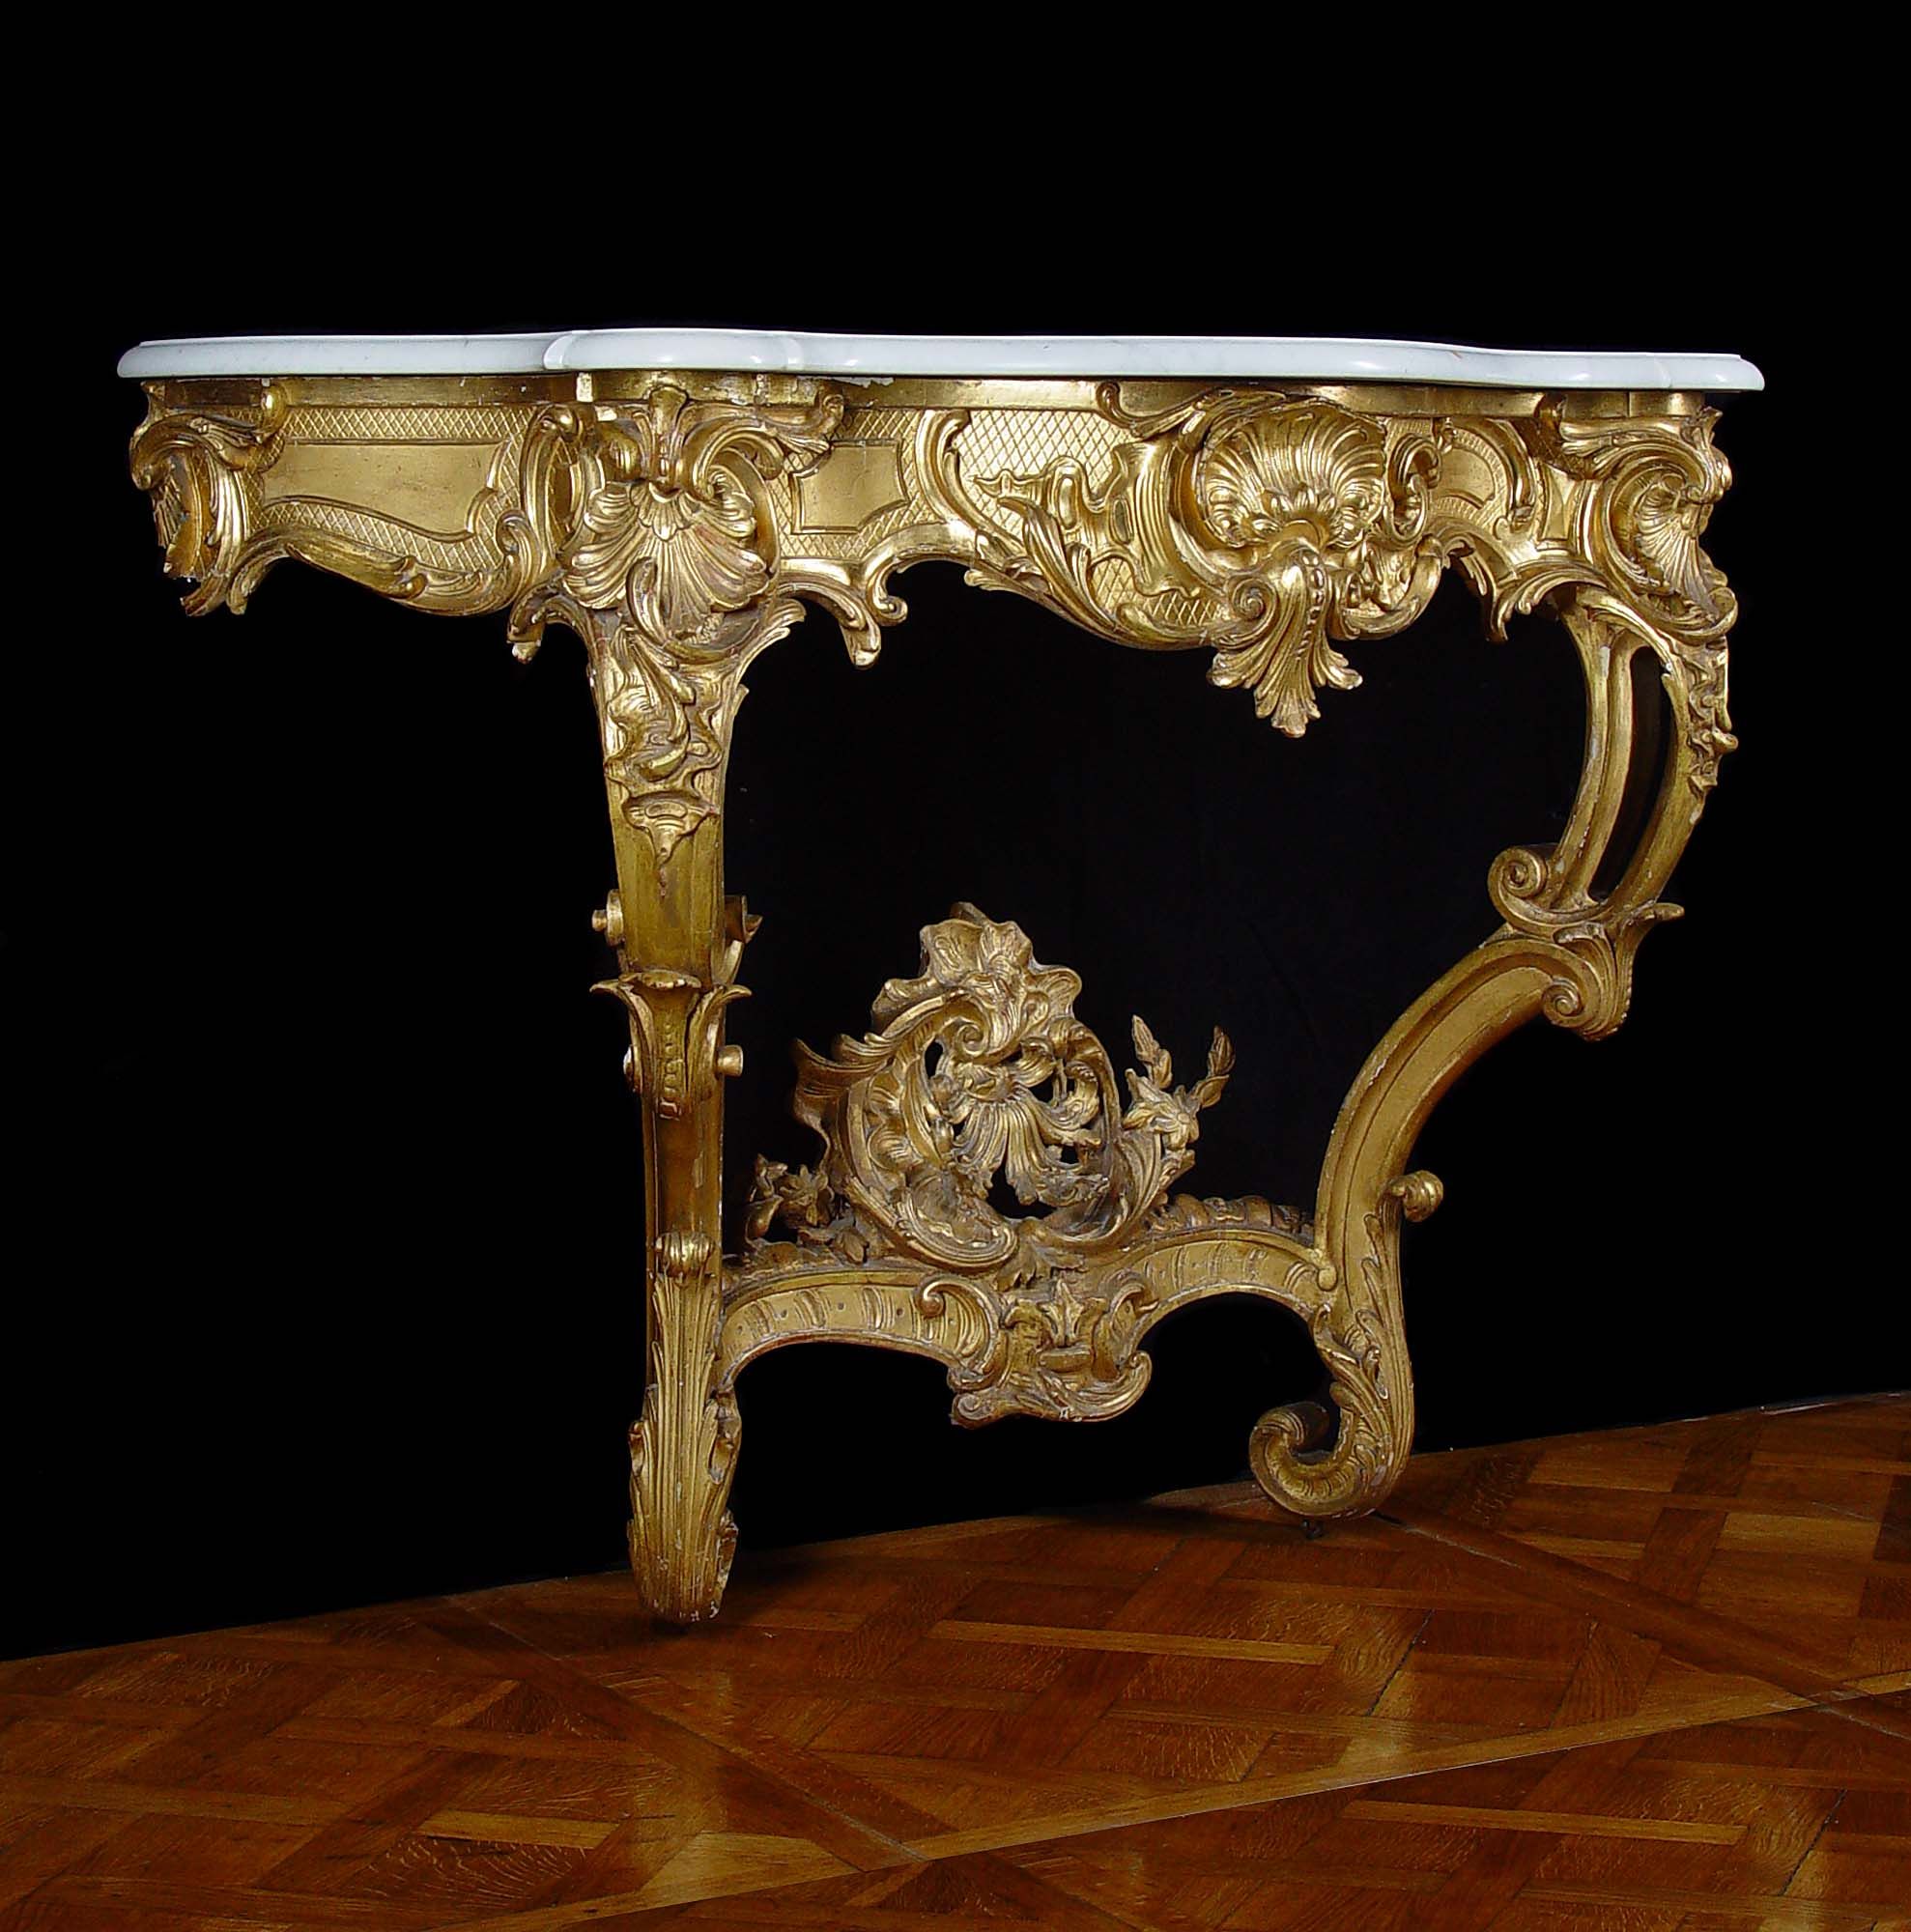 From Gilt To Gesso: The Finishing Touches Of French Furniture Design